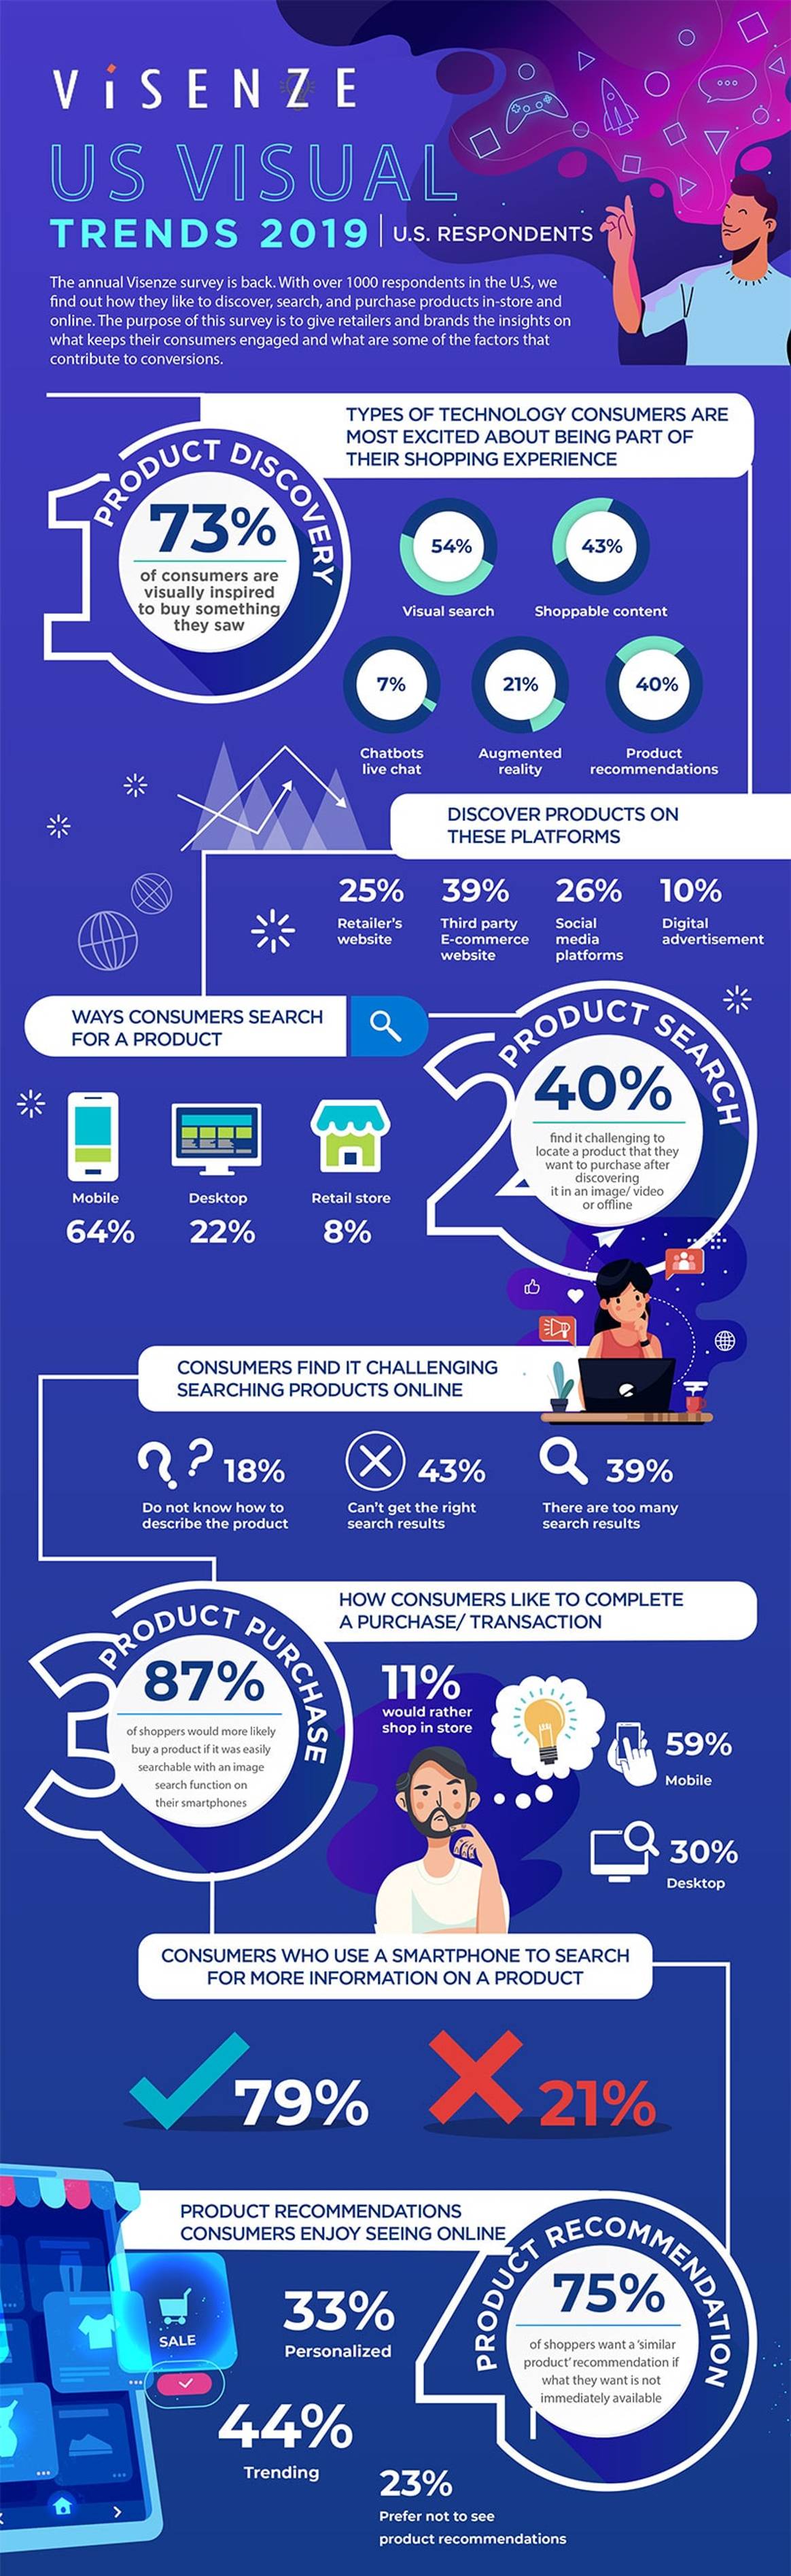 Infographic: How US consumers discovered, searched and purchased products in 2019